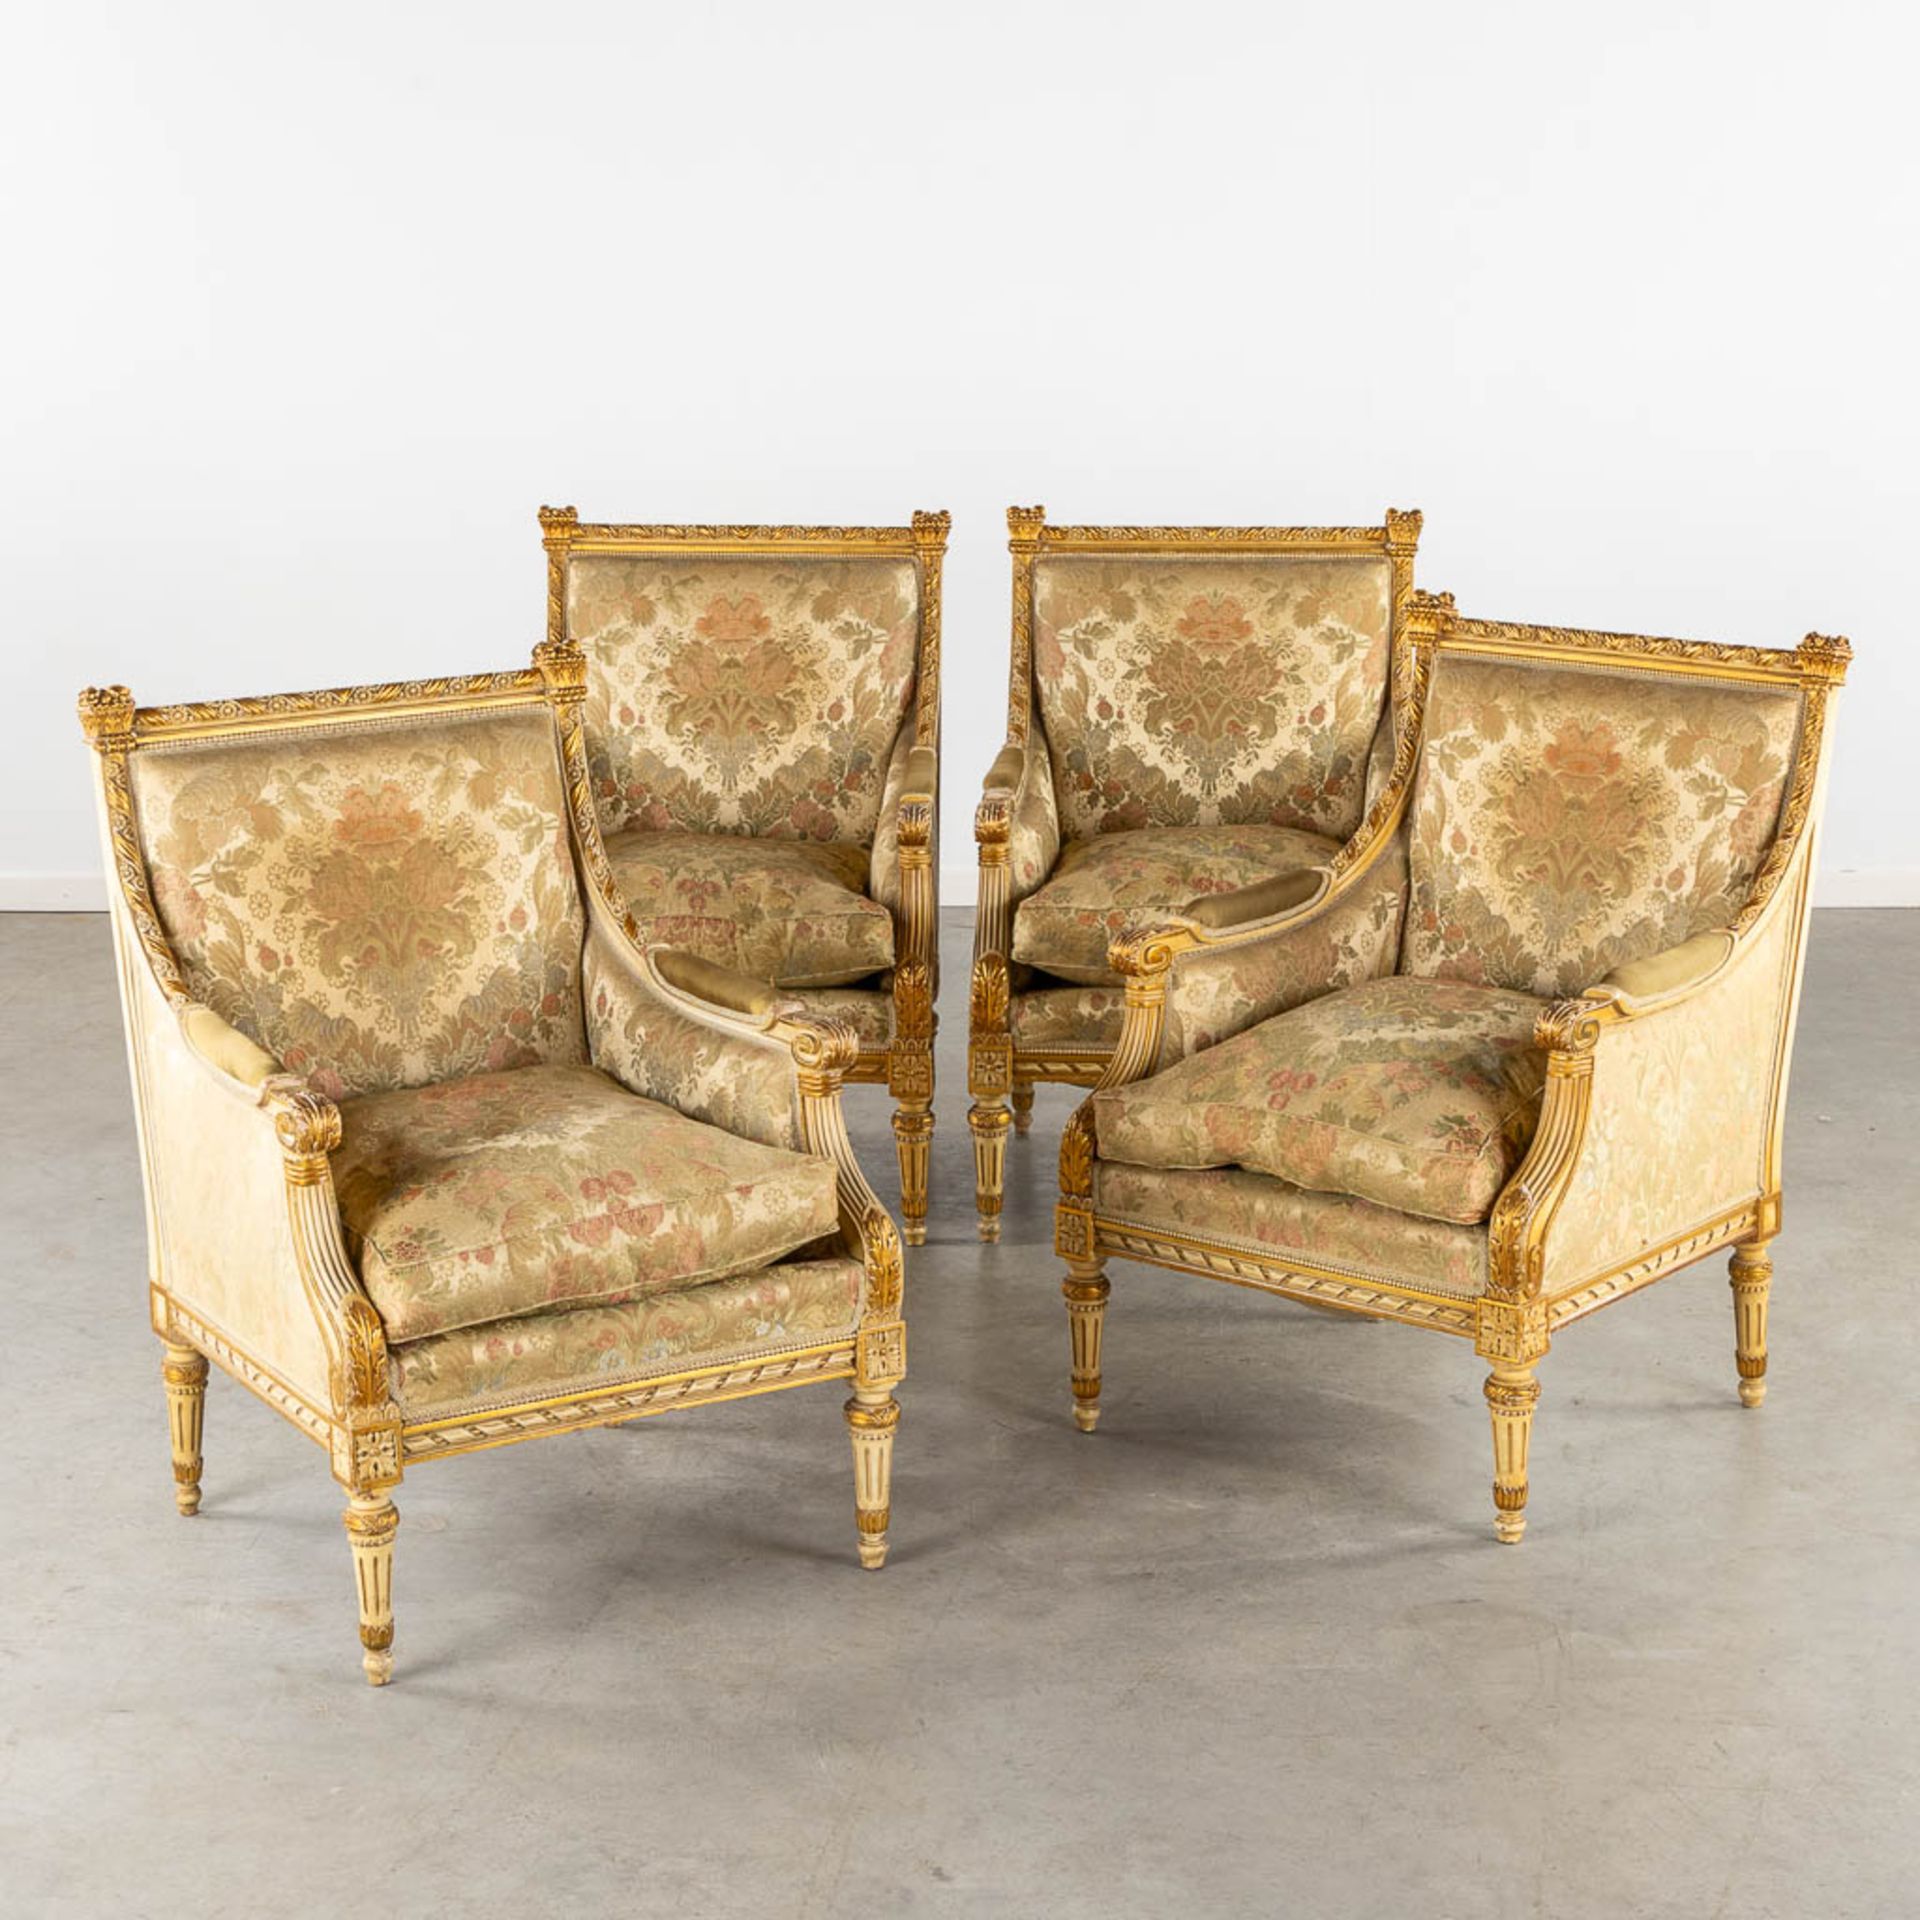 A set of 4 armchairs, sculptured and gilt wood in Louis XVI style. Circa 1920. (L:70 x W:67 x H:95 c